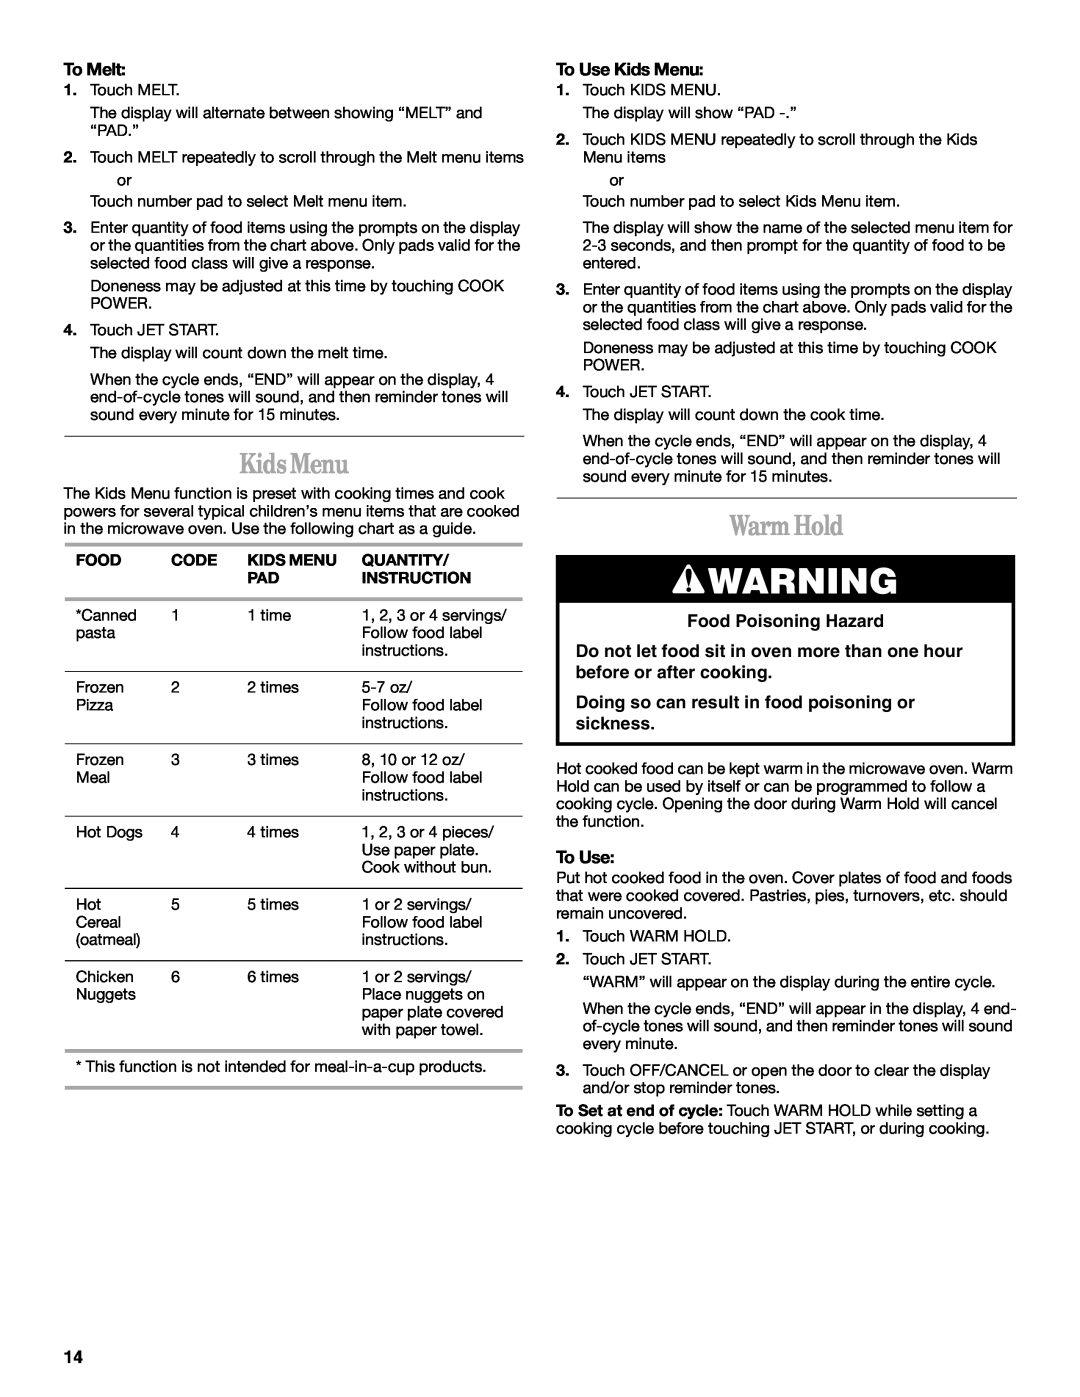 Whirlpool GH9184XL manual Warm Hold, To Melt, To Use Kids Menu, Food Poisoning Hazard, Code, Quantity, Instruction 